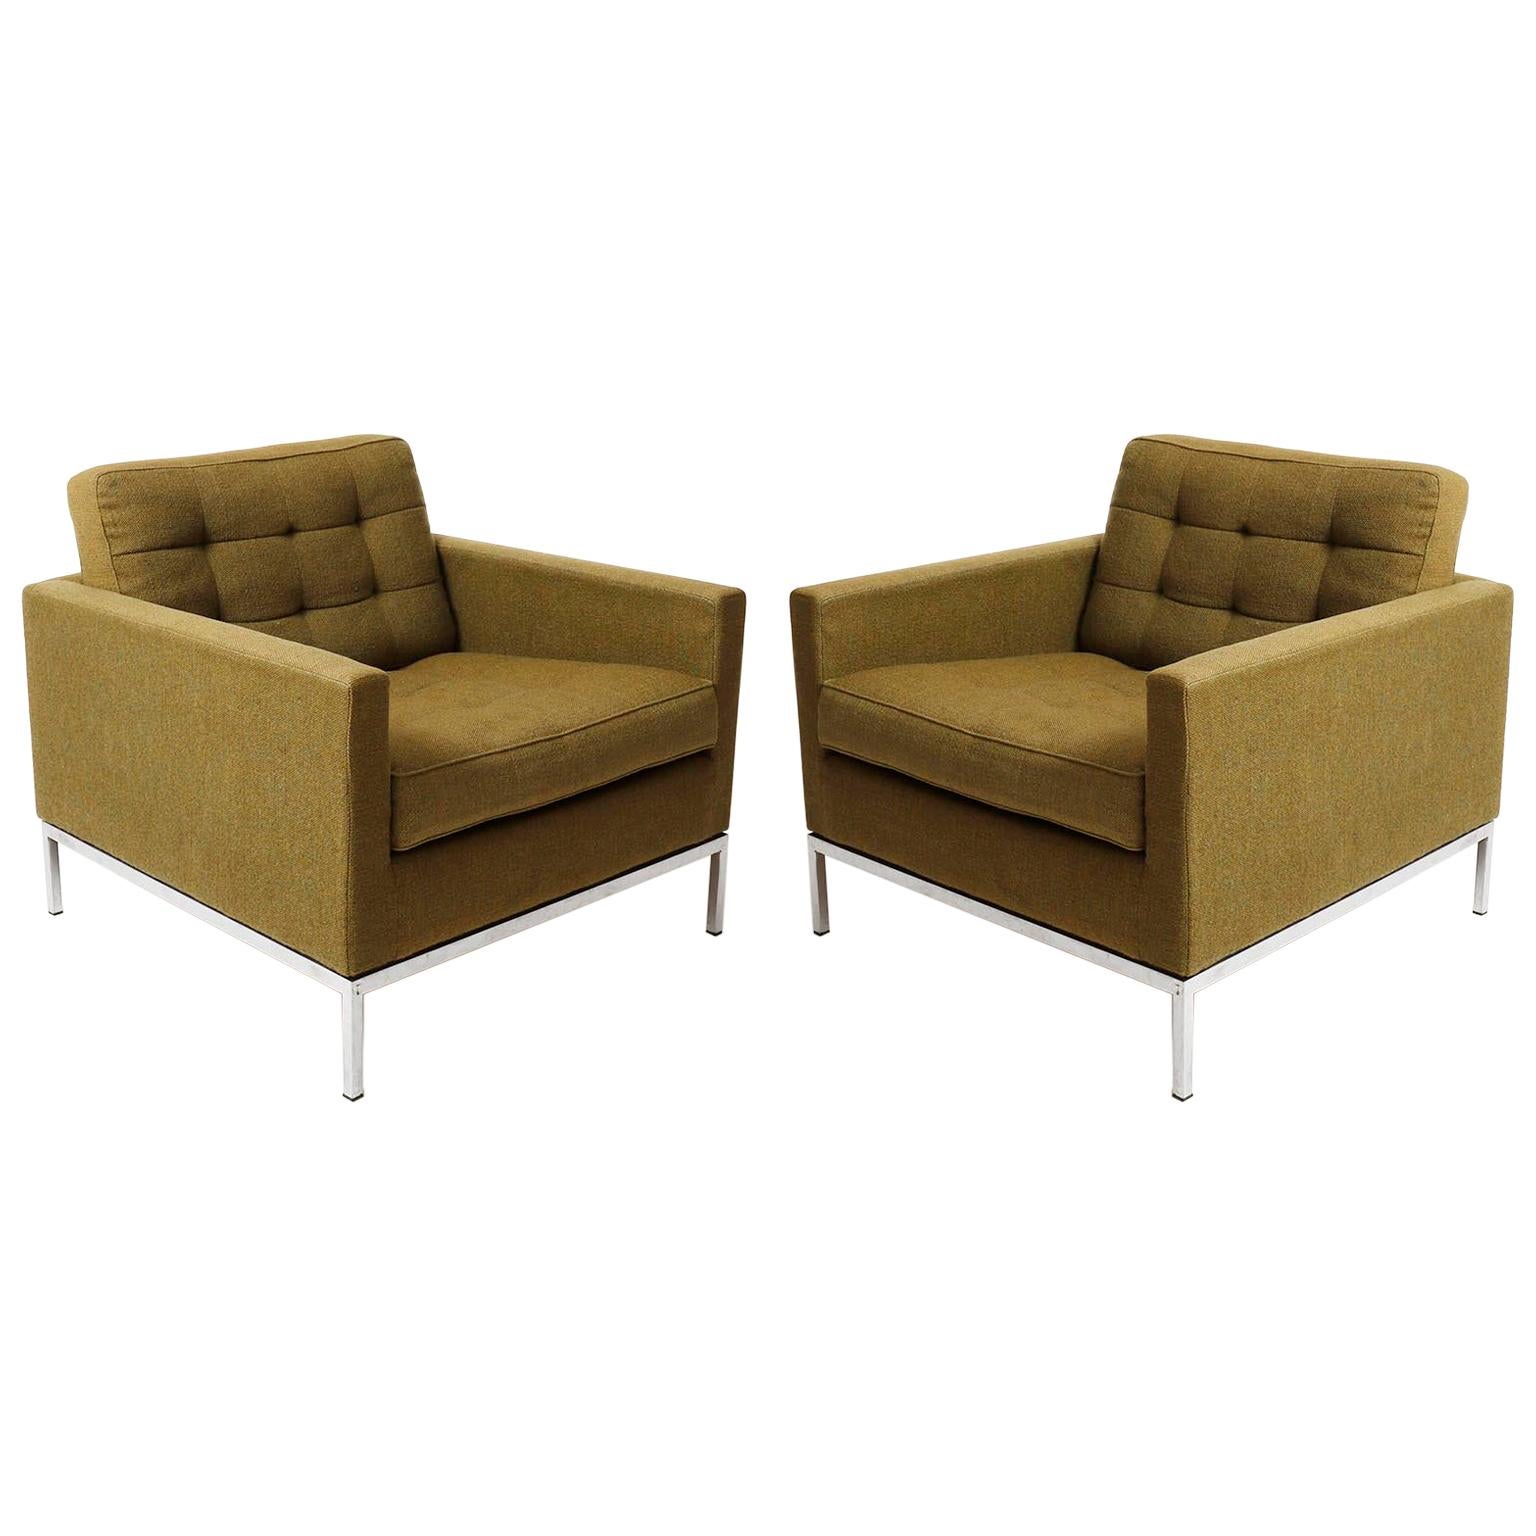 Pair of Green Florence Knoll Lounge Chairs Armchairs, Knoll International, 1954